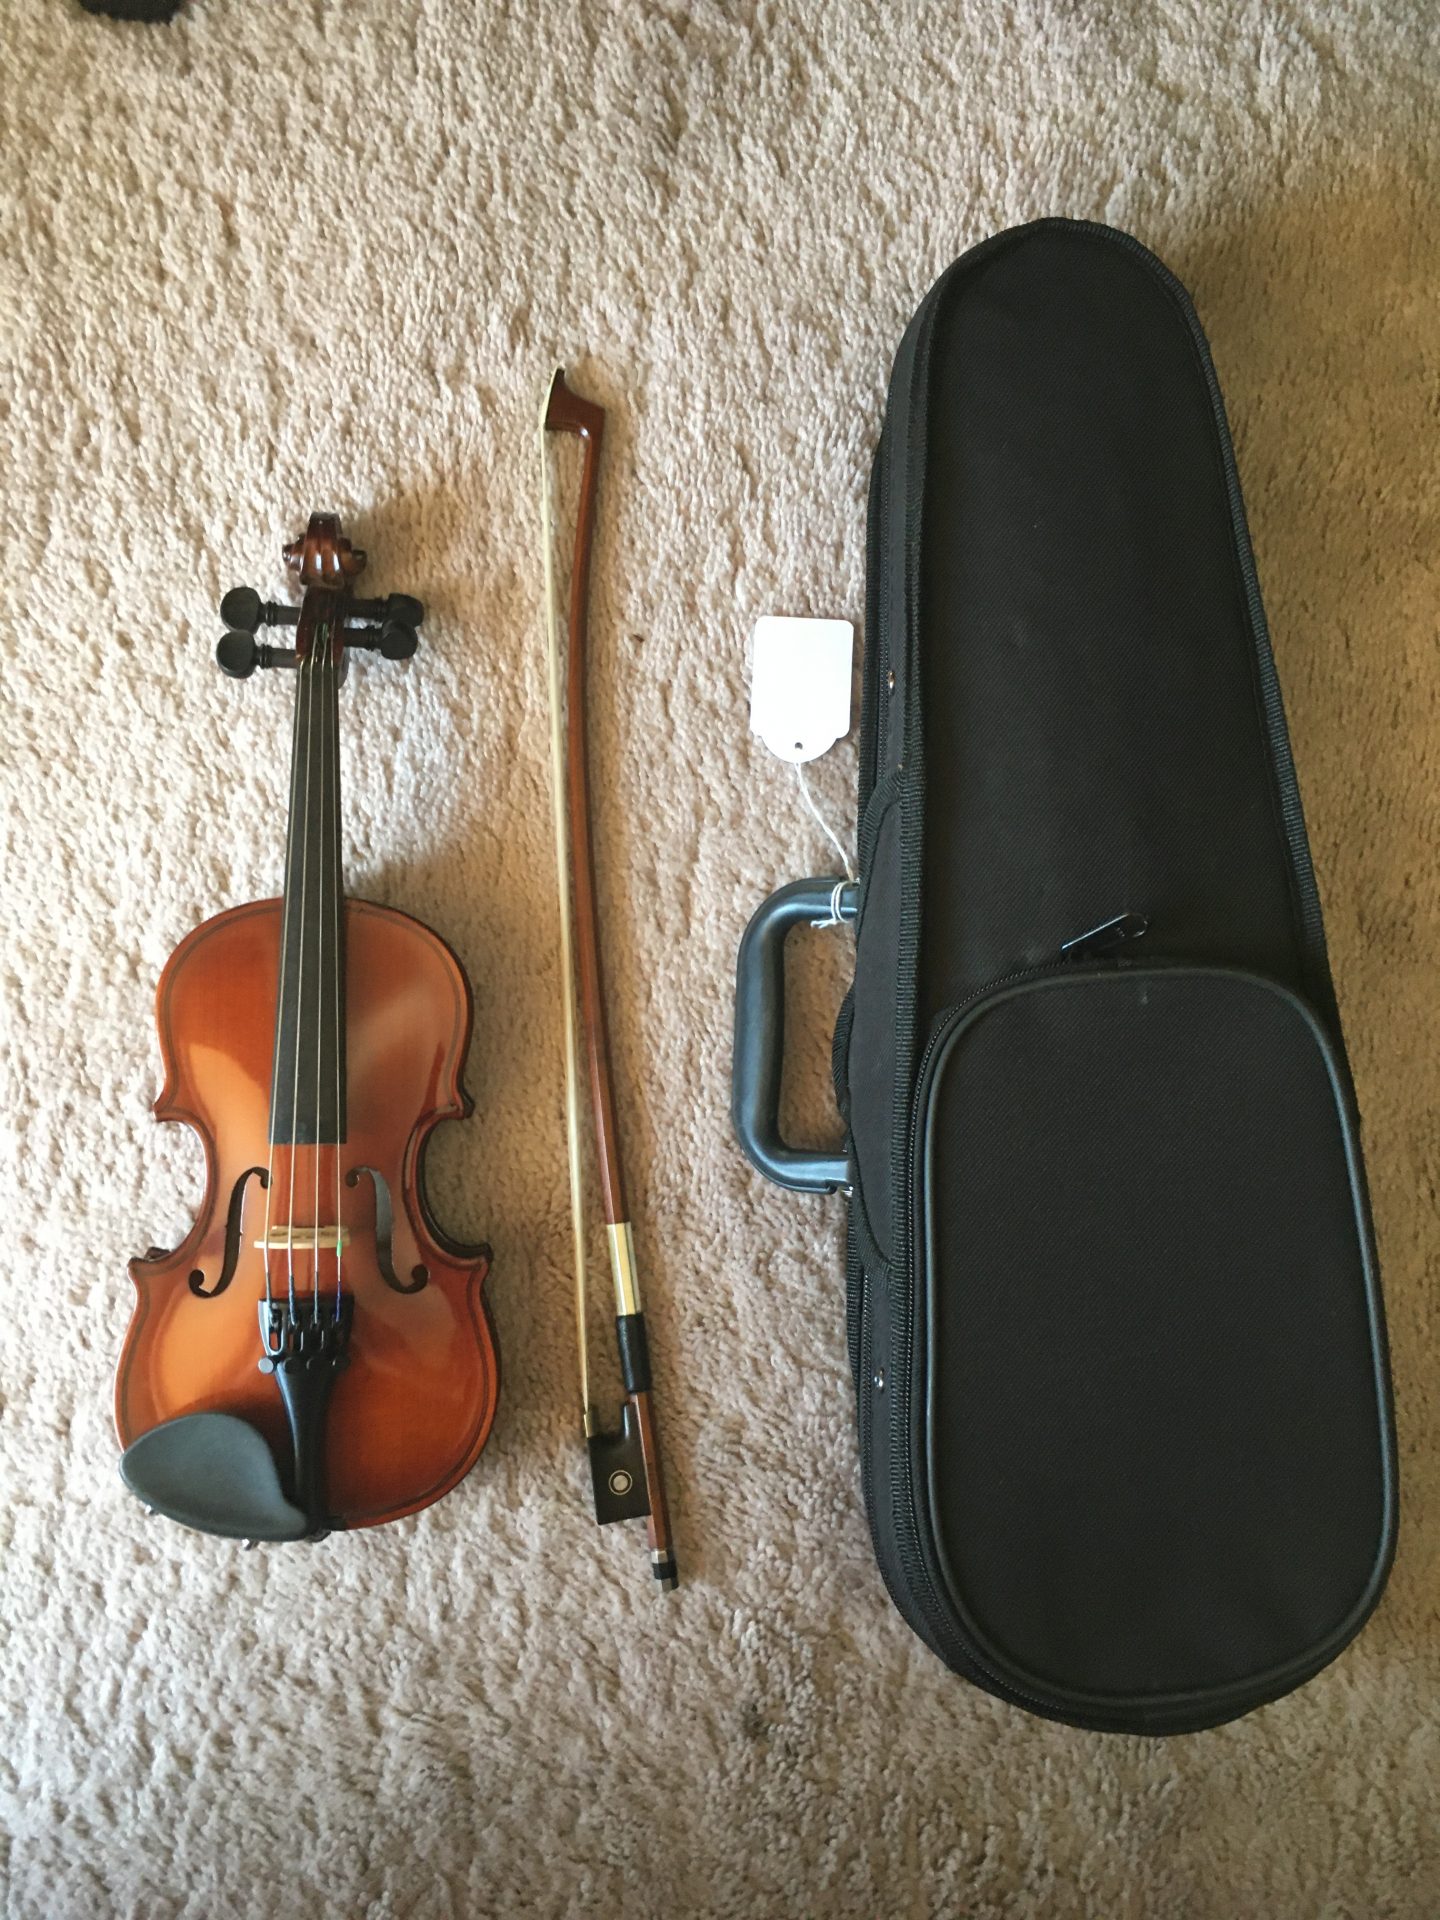 1/16 size new St Antonio violin outfit